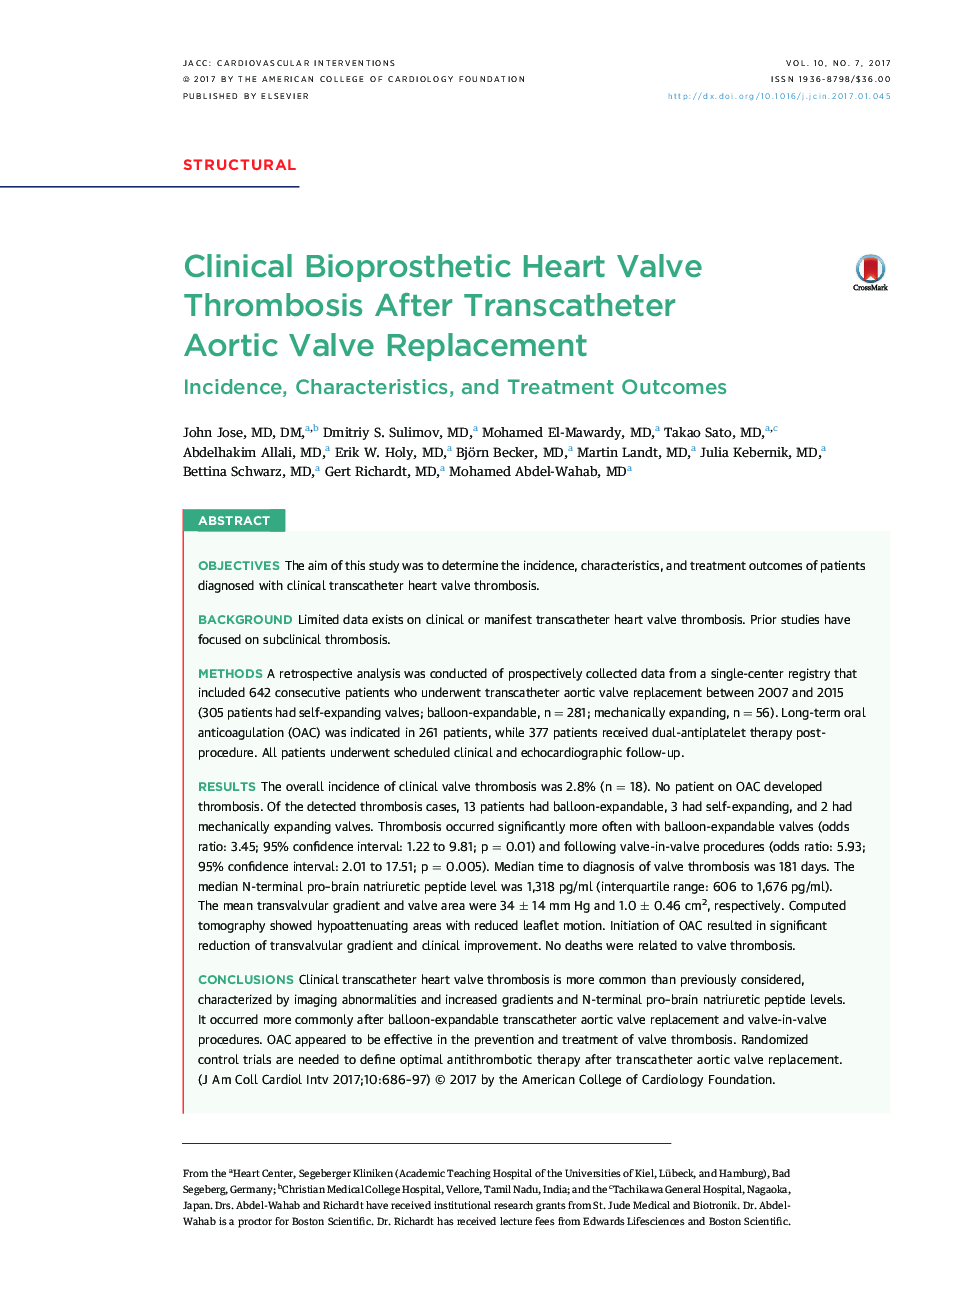 Clinical Bioprosthetic Heart Valve Thrombosis After Transcatheter AorticÂ Valve Replacement